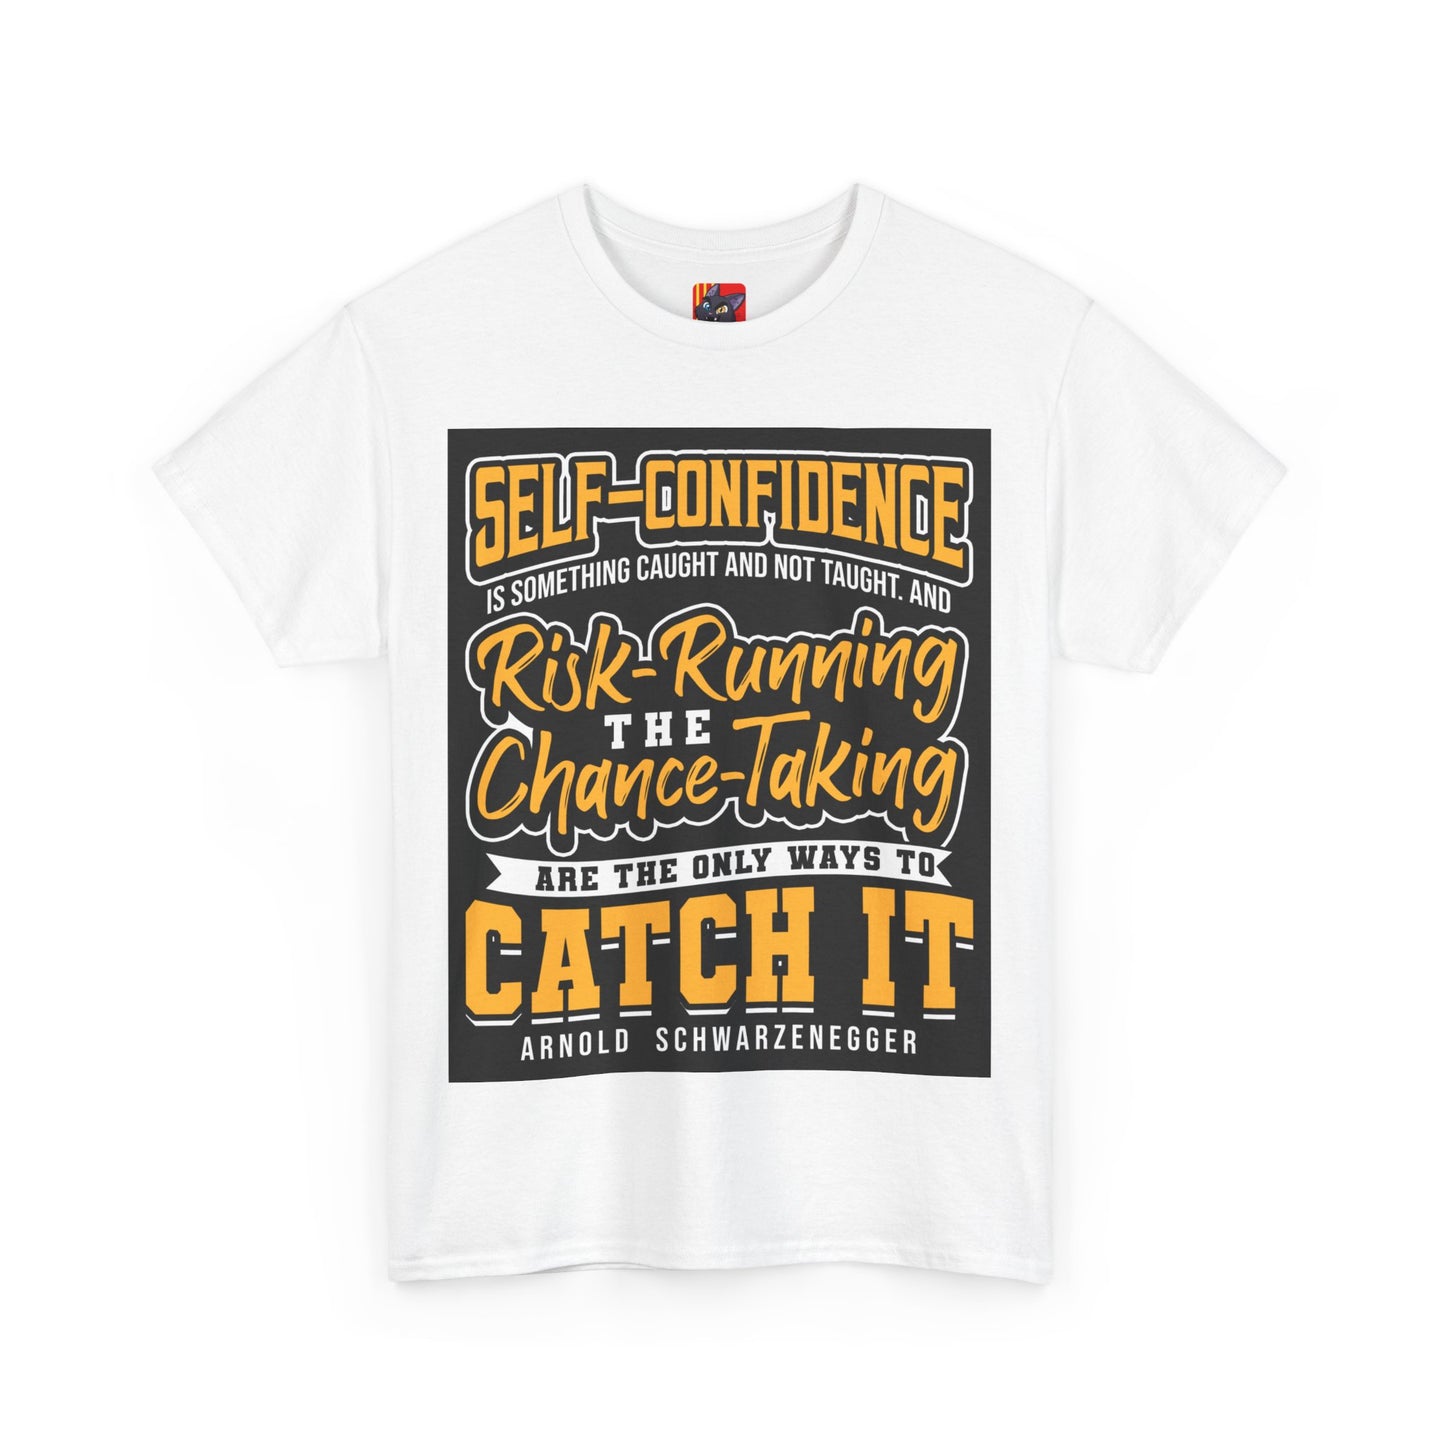 The Adaptable Achiever T-Shirt: Self-confidence is something caught and not taught